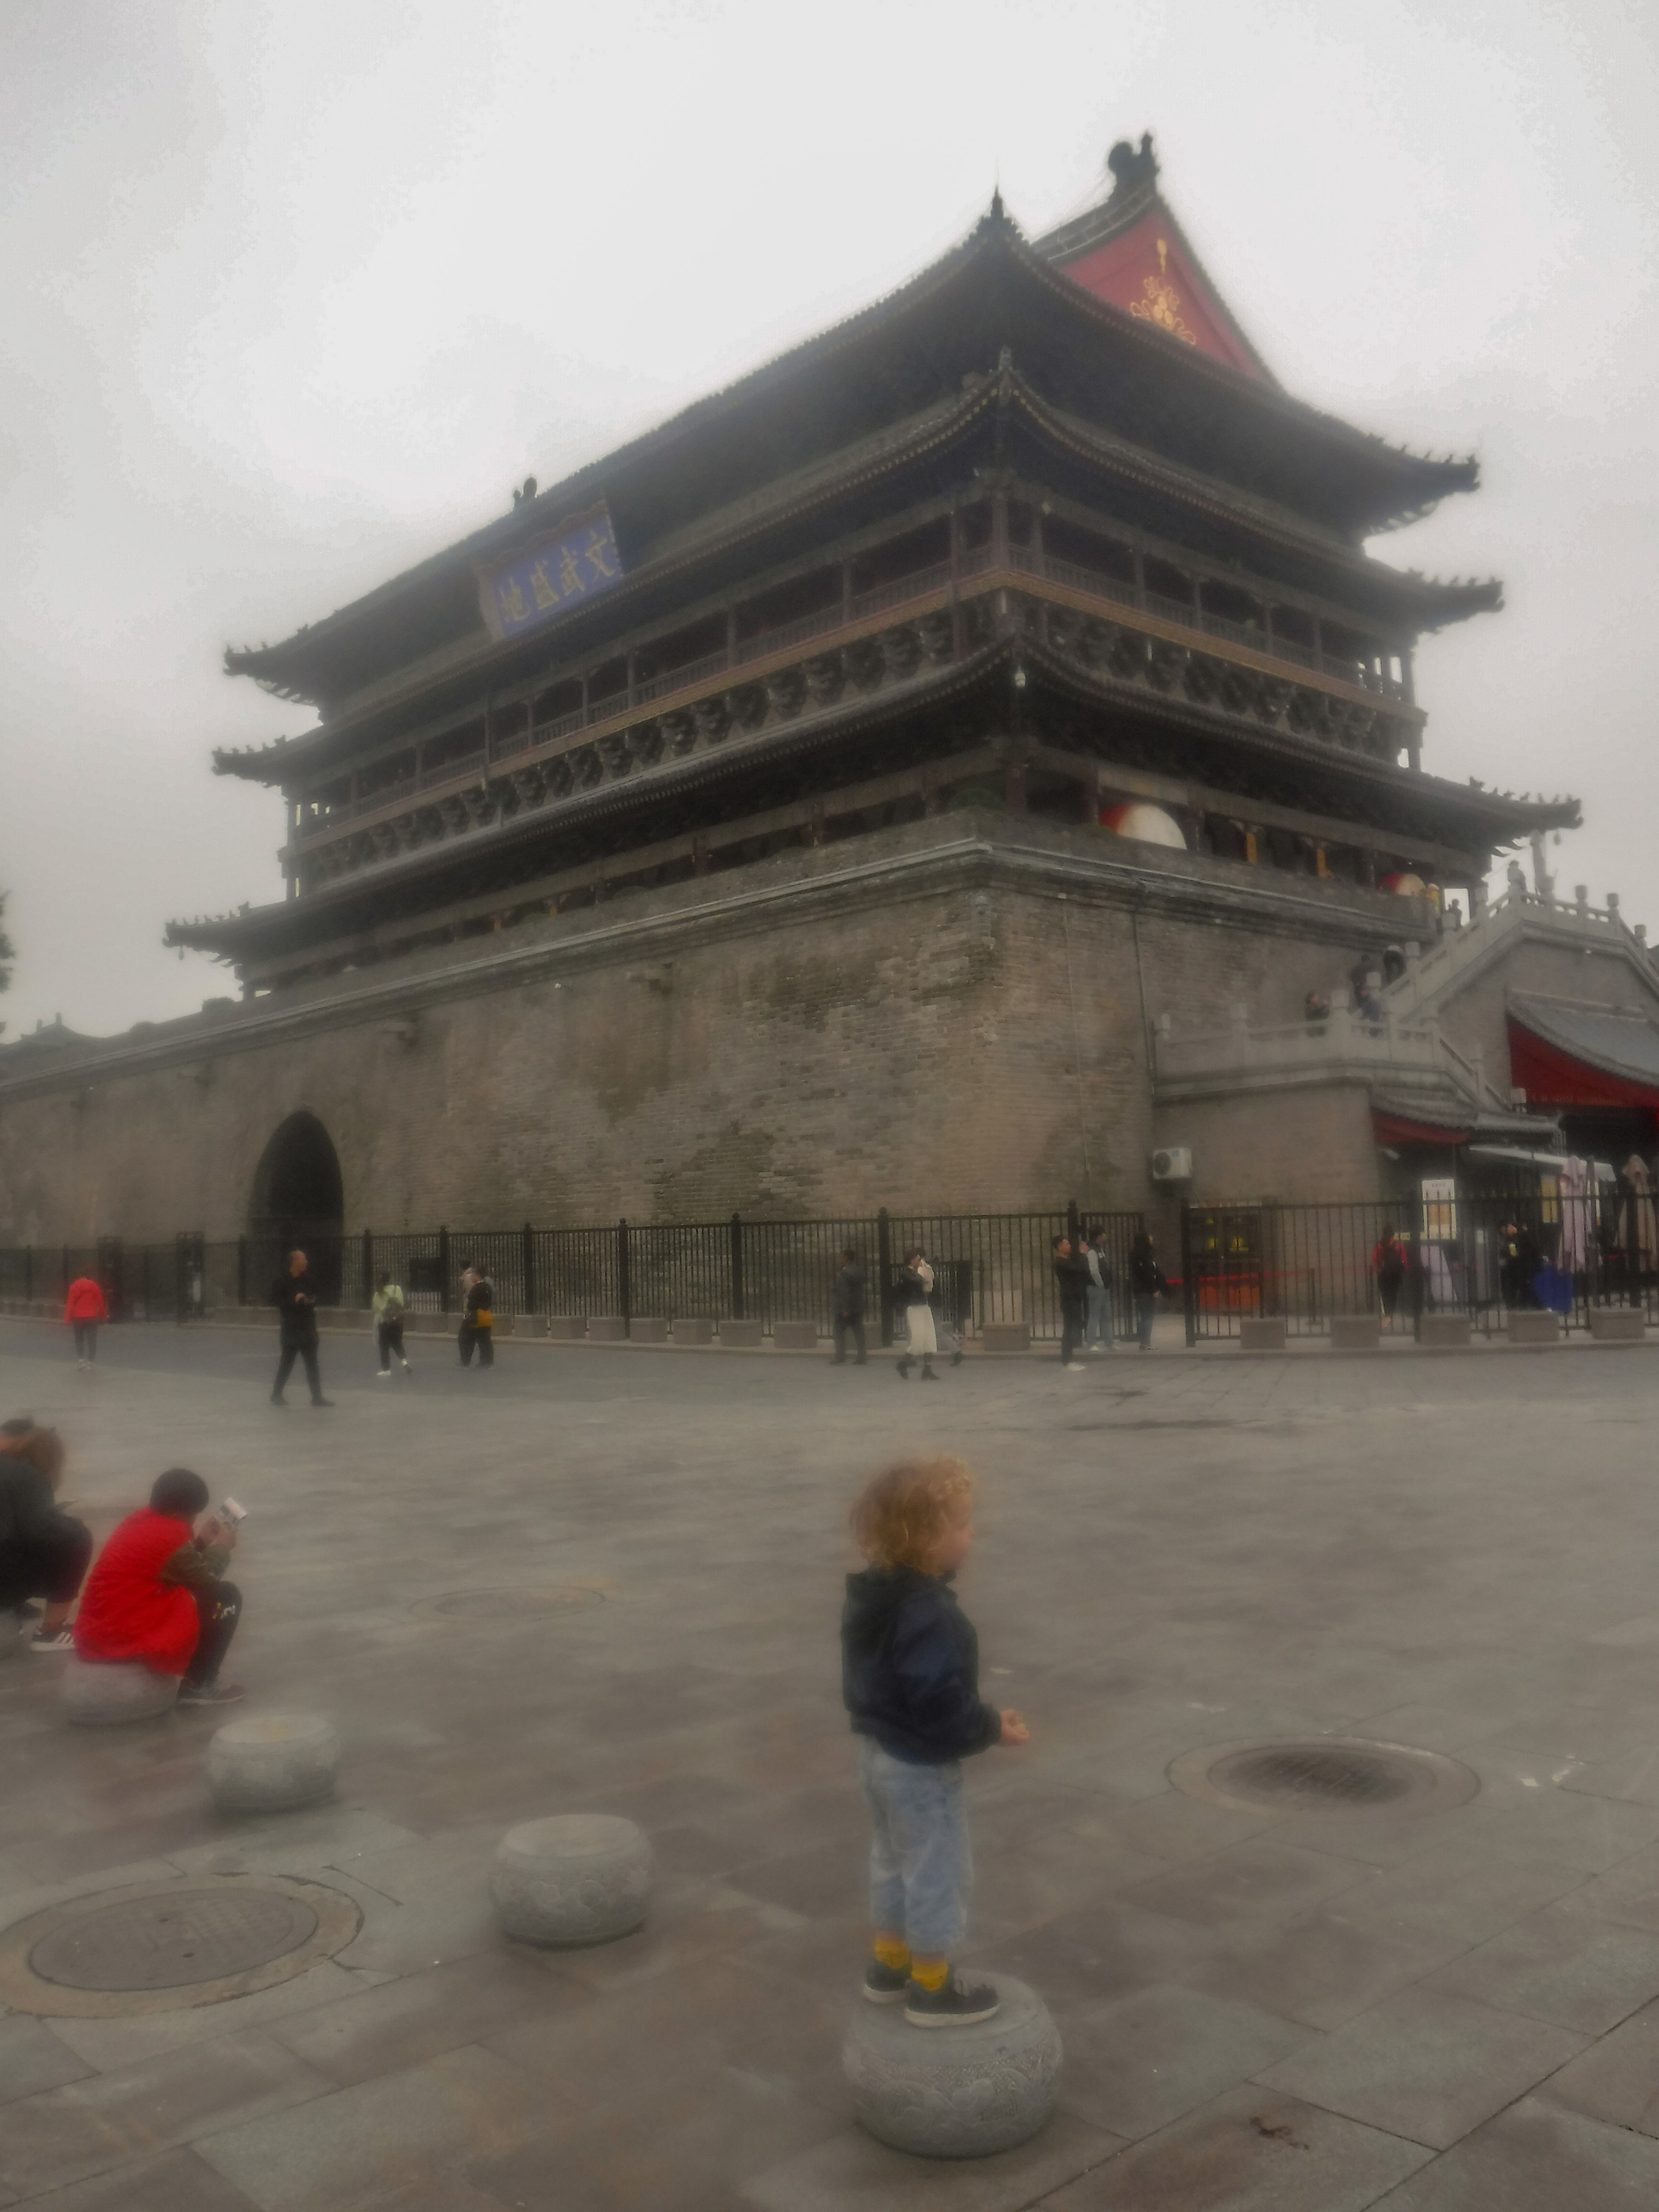 child stood in front of drum tower in Xian in China